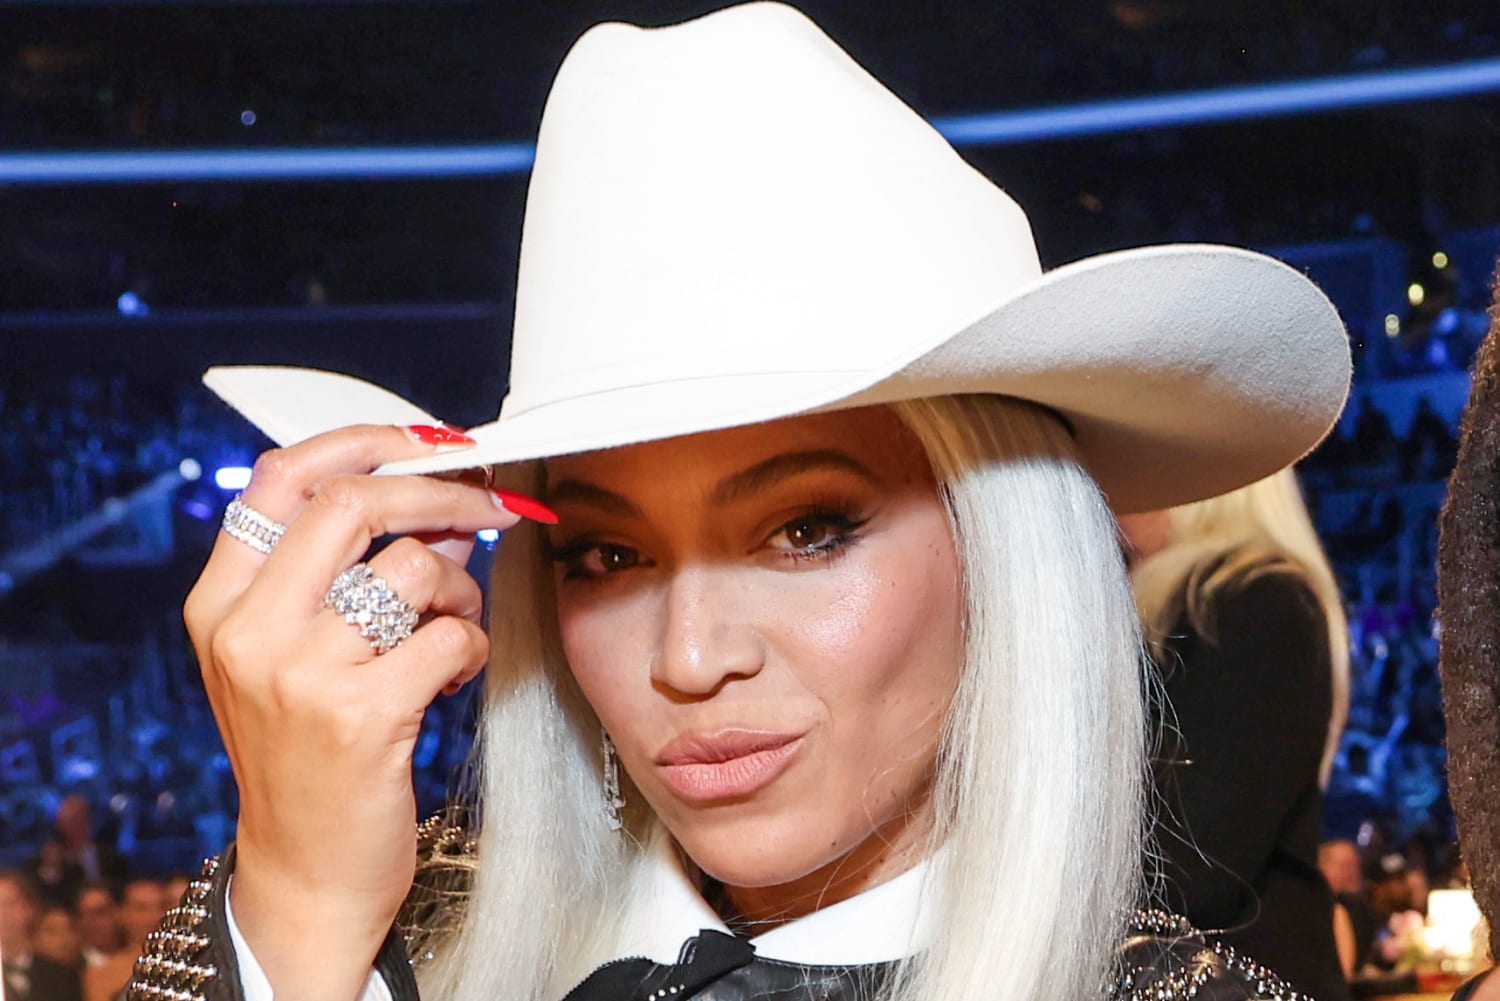 Beyoncé says her new album 'Cowboy Carter' was inspired by the backlash to her foray into the country music genre.